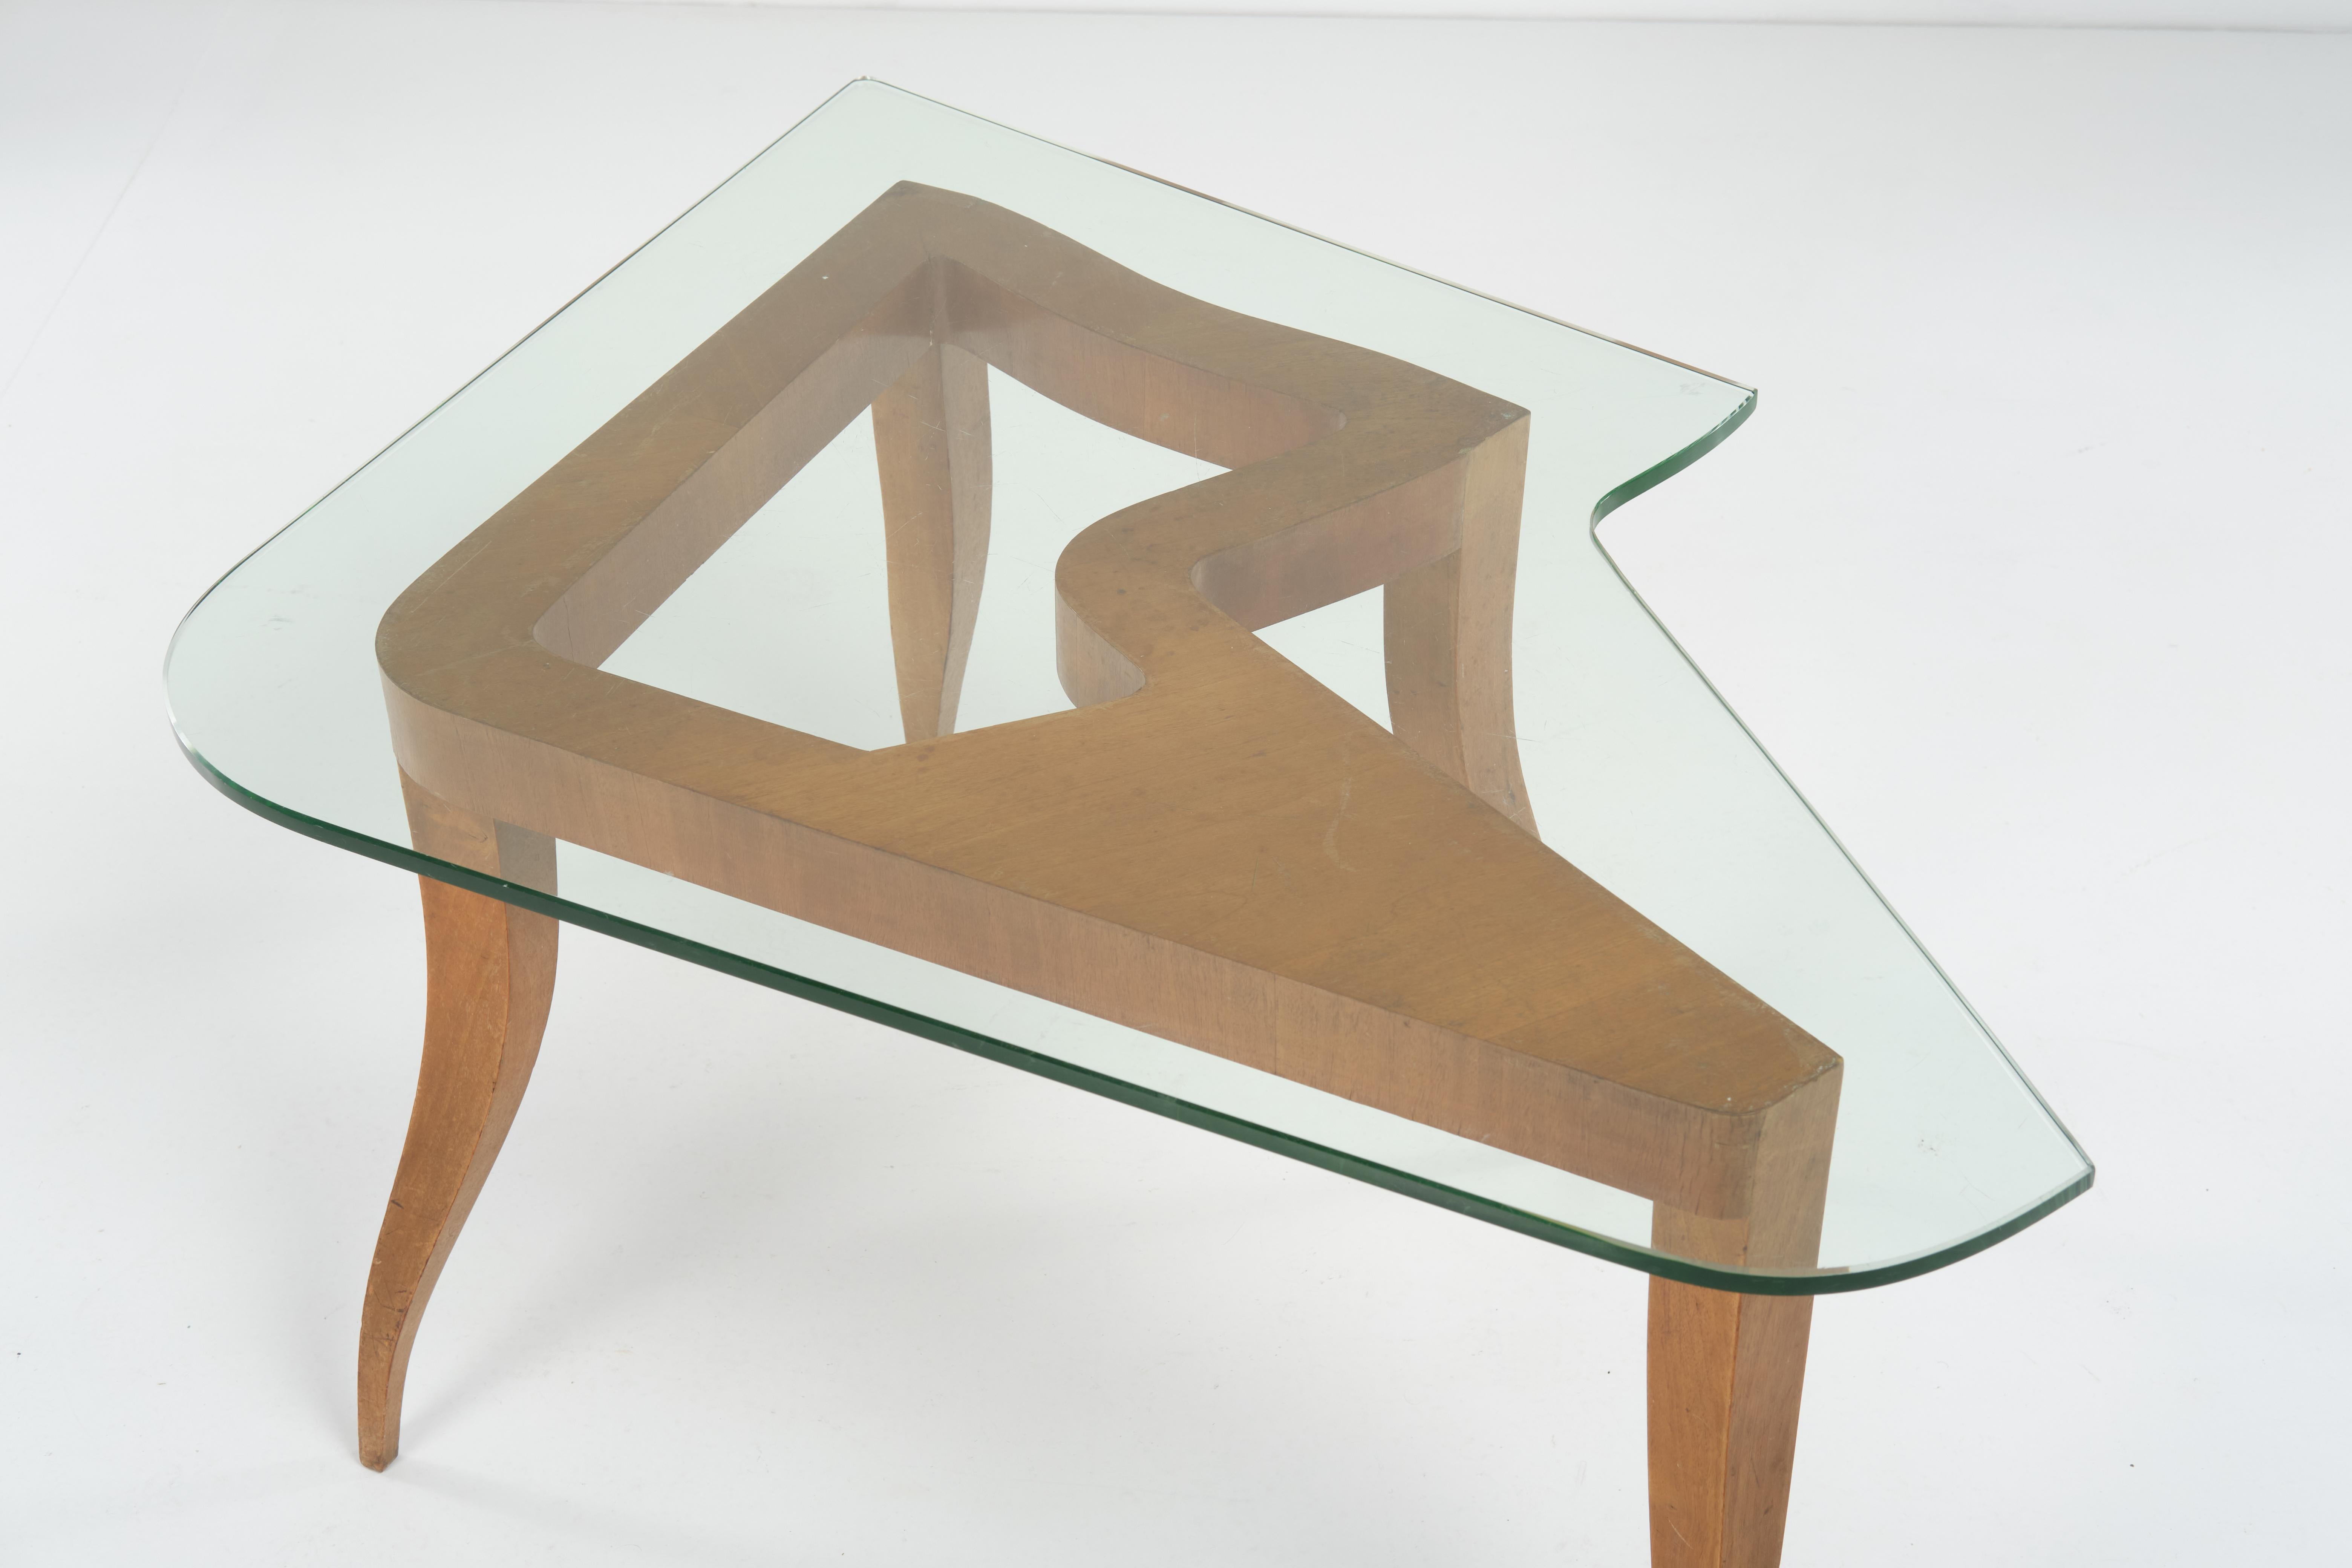 Melchiorre Bega Coffe Table in Glass and Wood 1940 Ca. For Sale 1